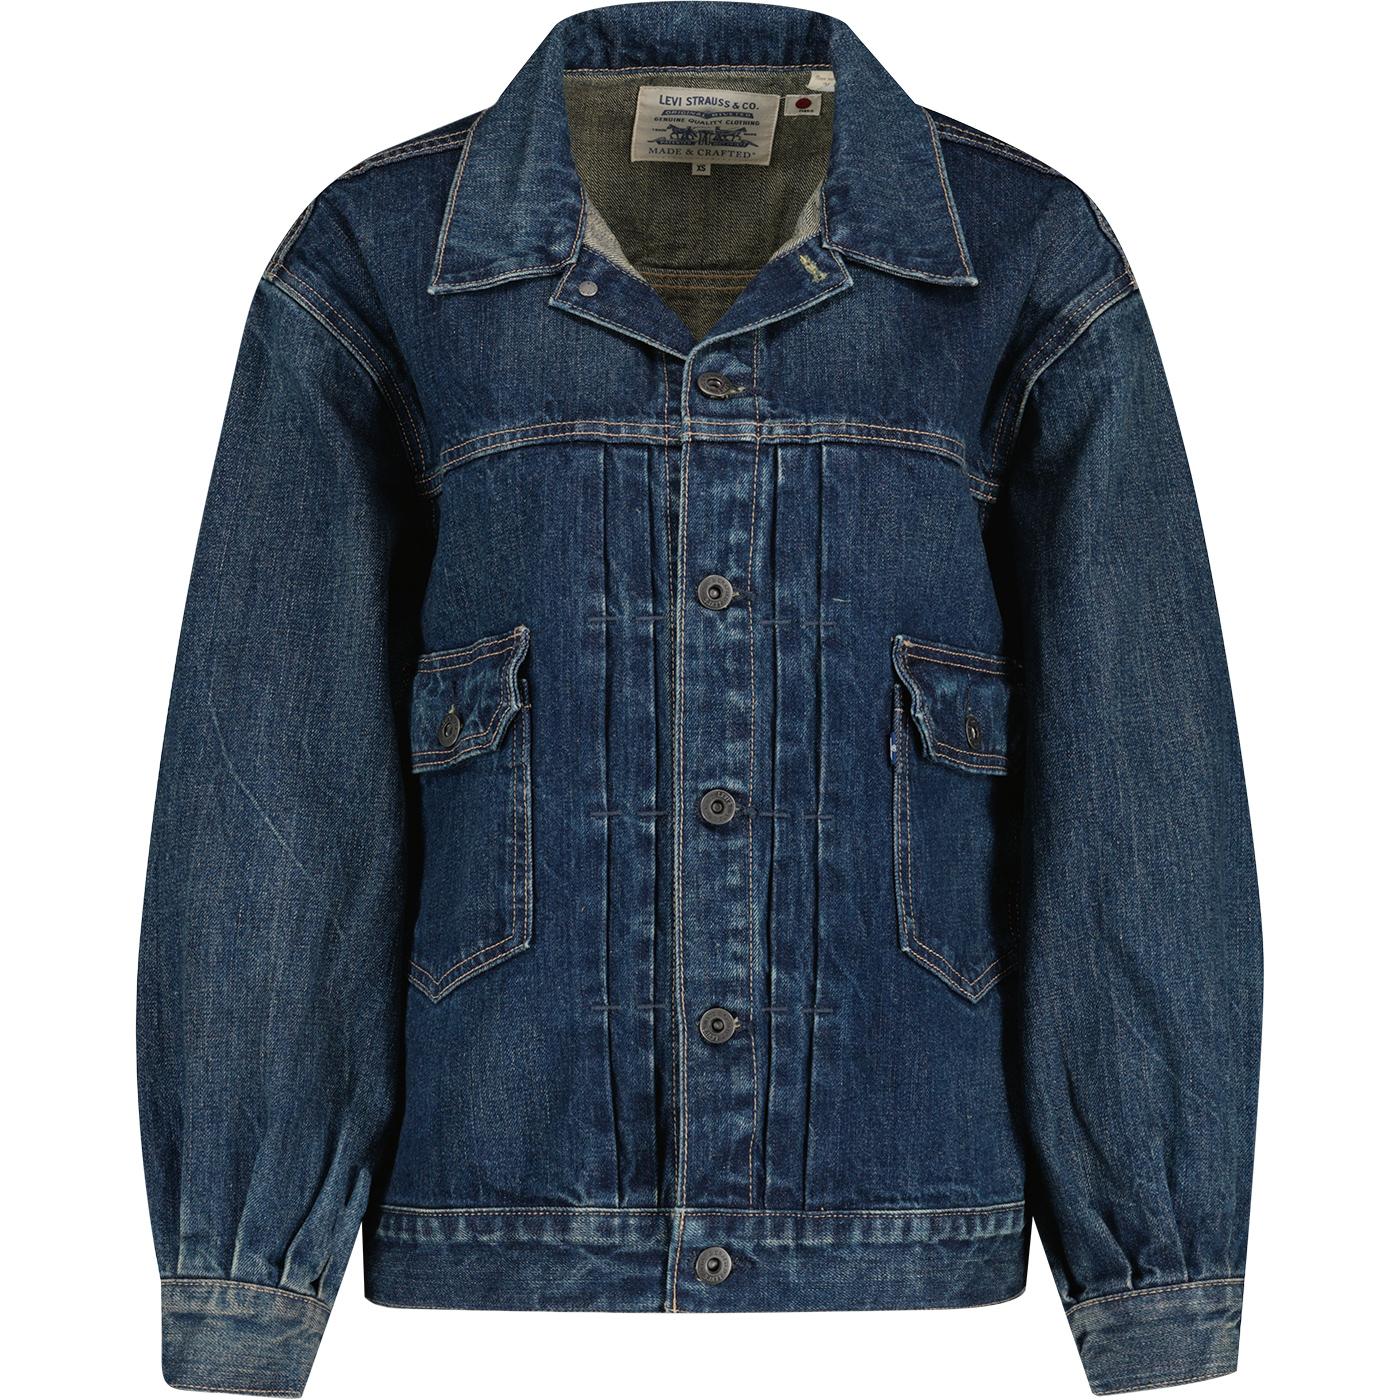 Levi's® Made & Crafted® Type II Trucker Jacket DR